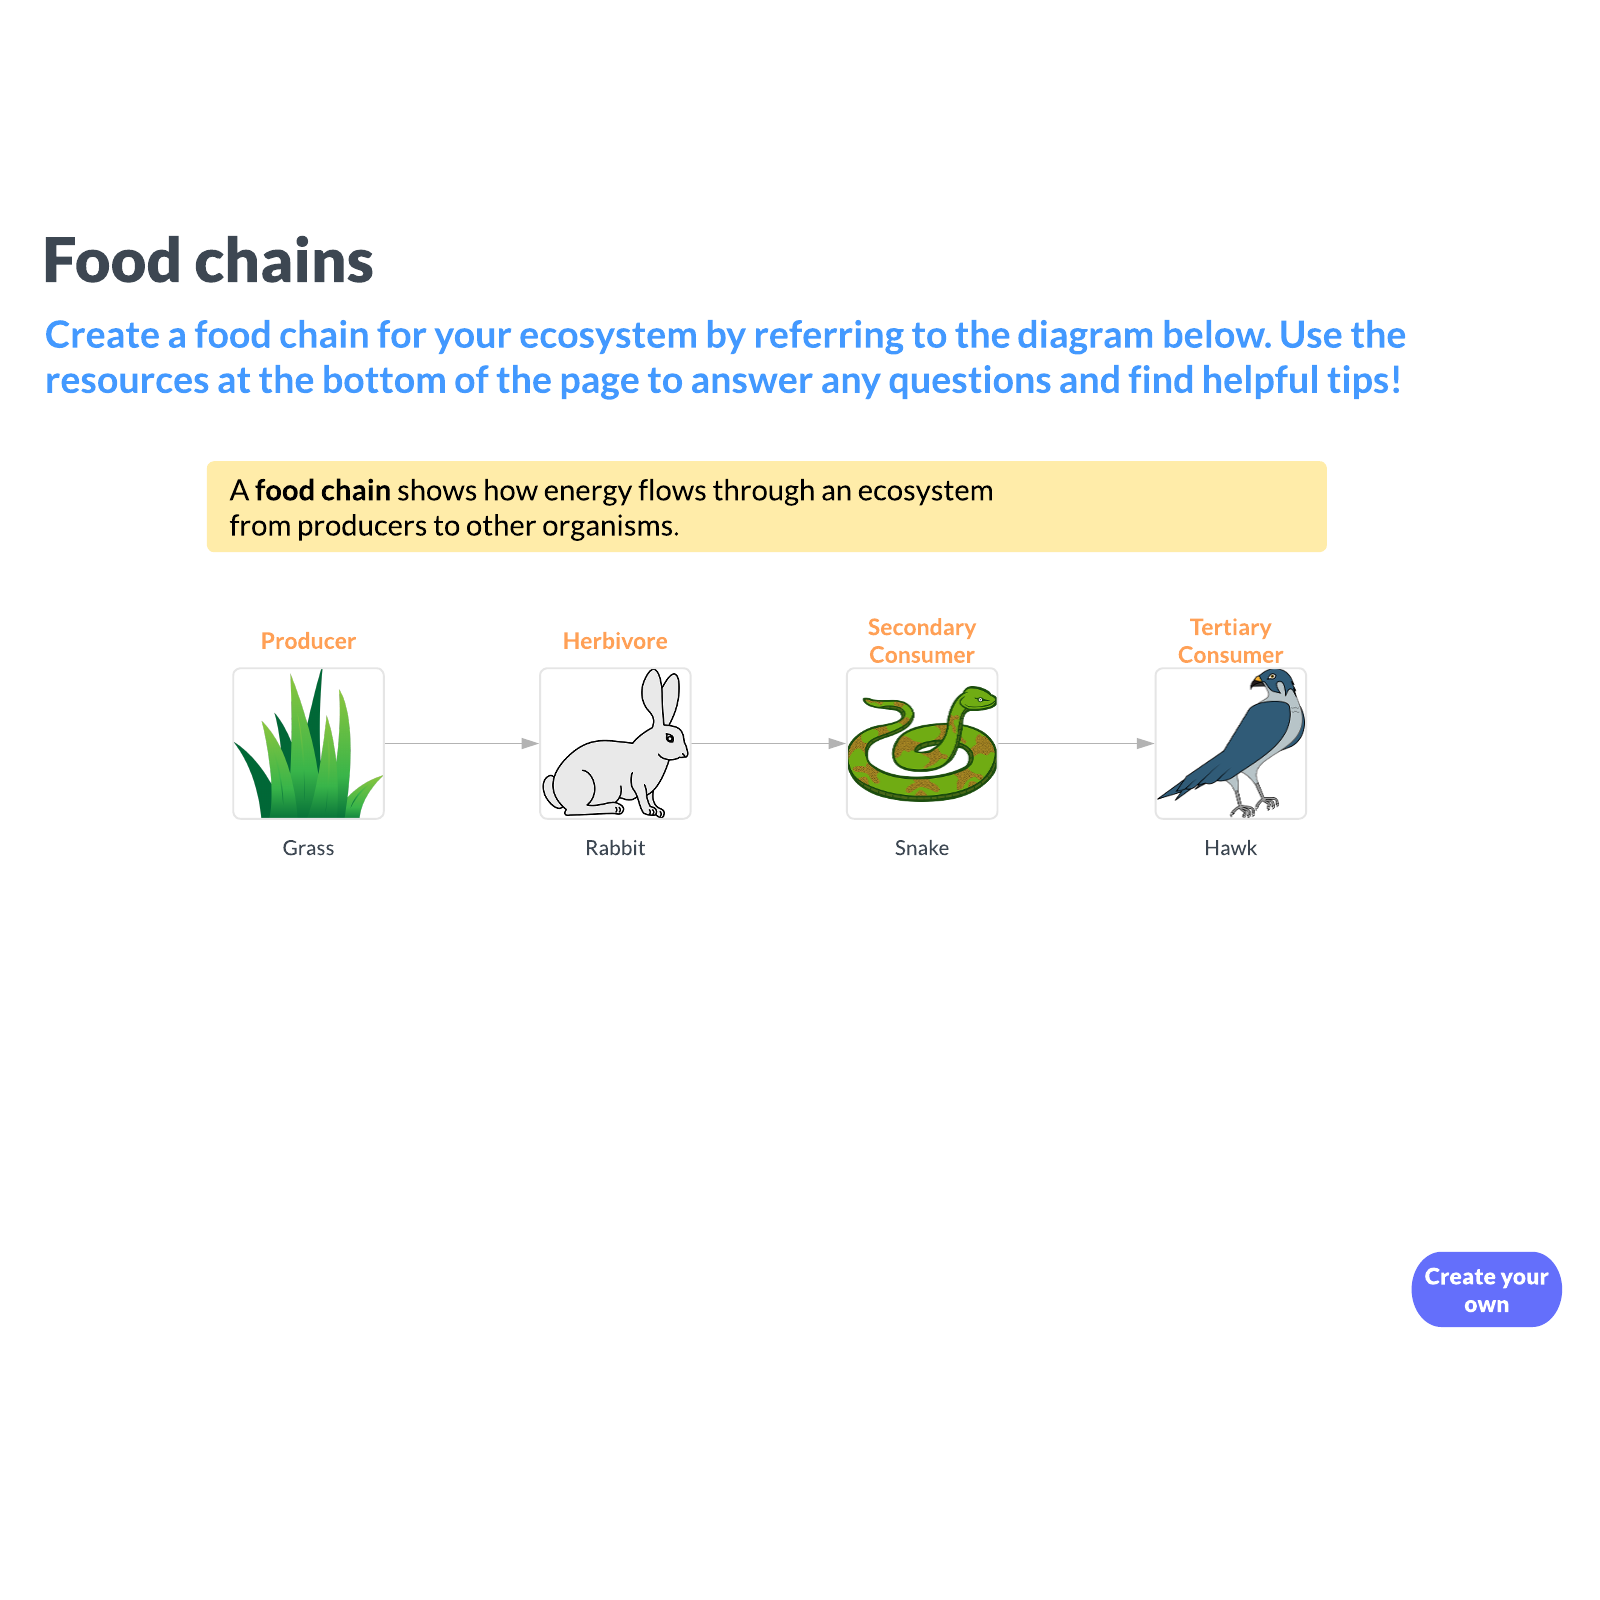 Food chains example